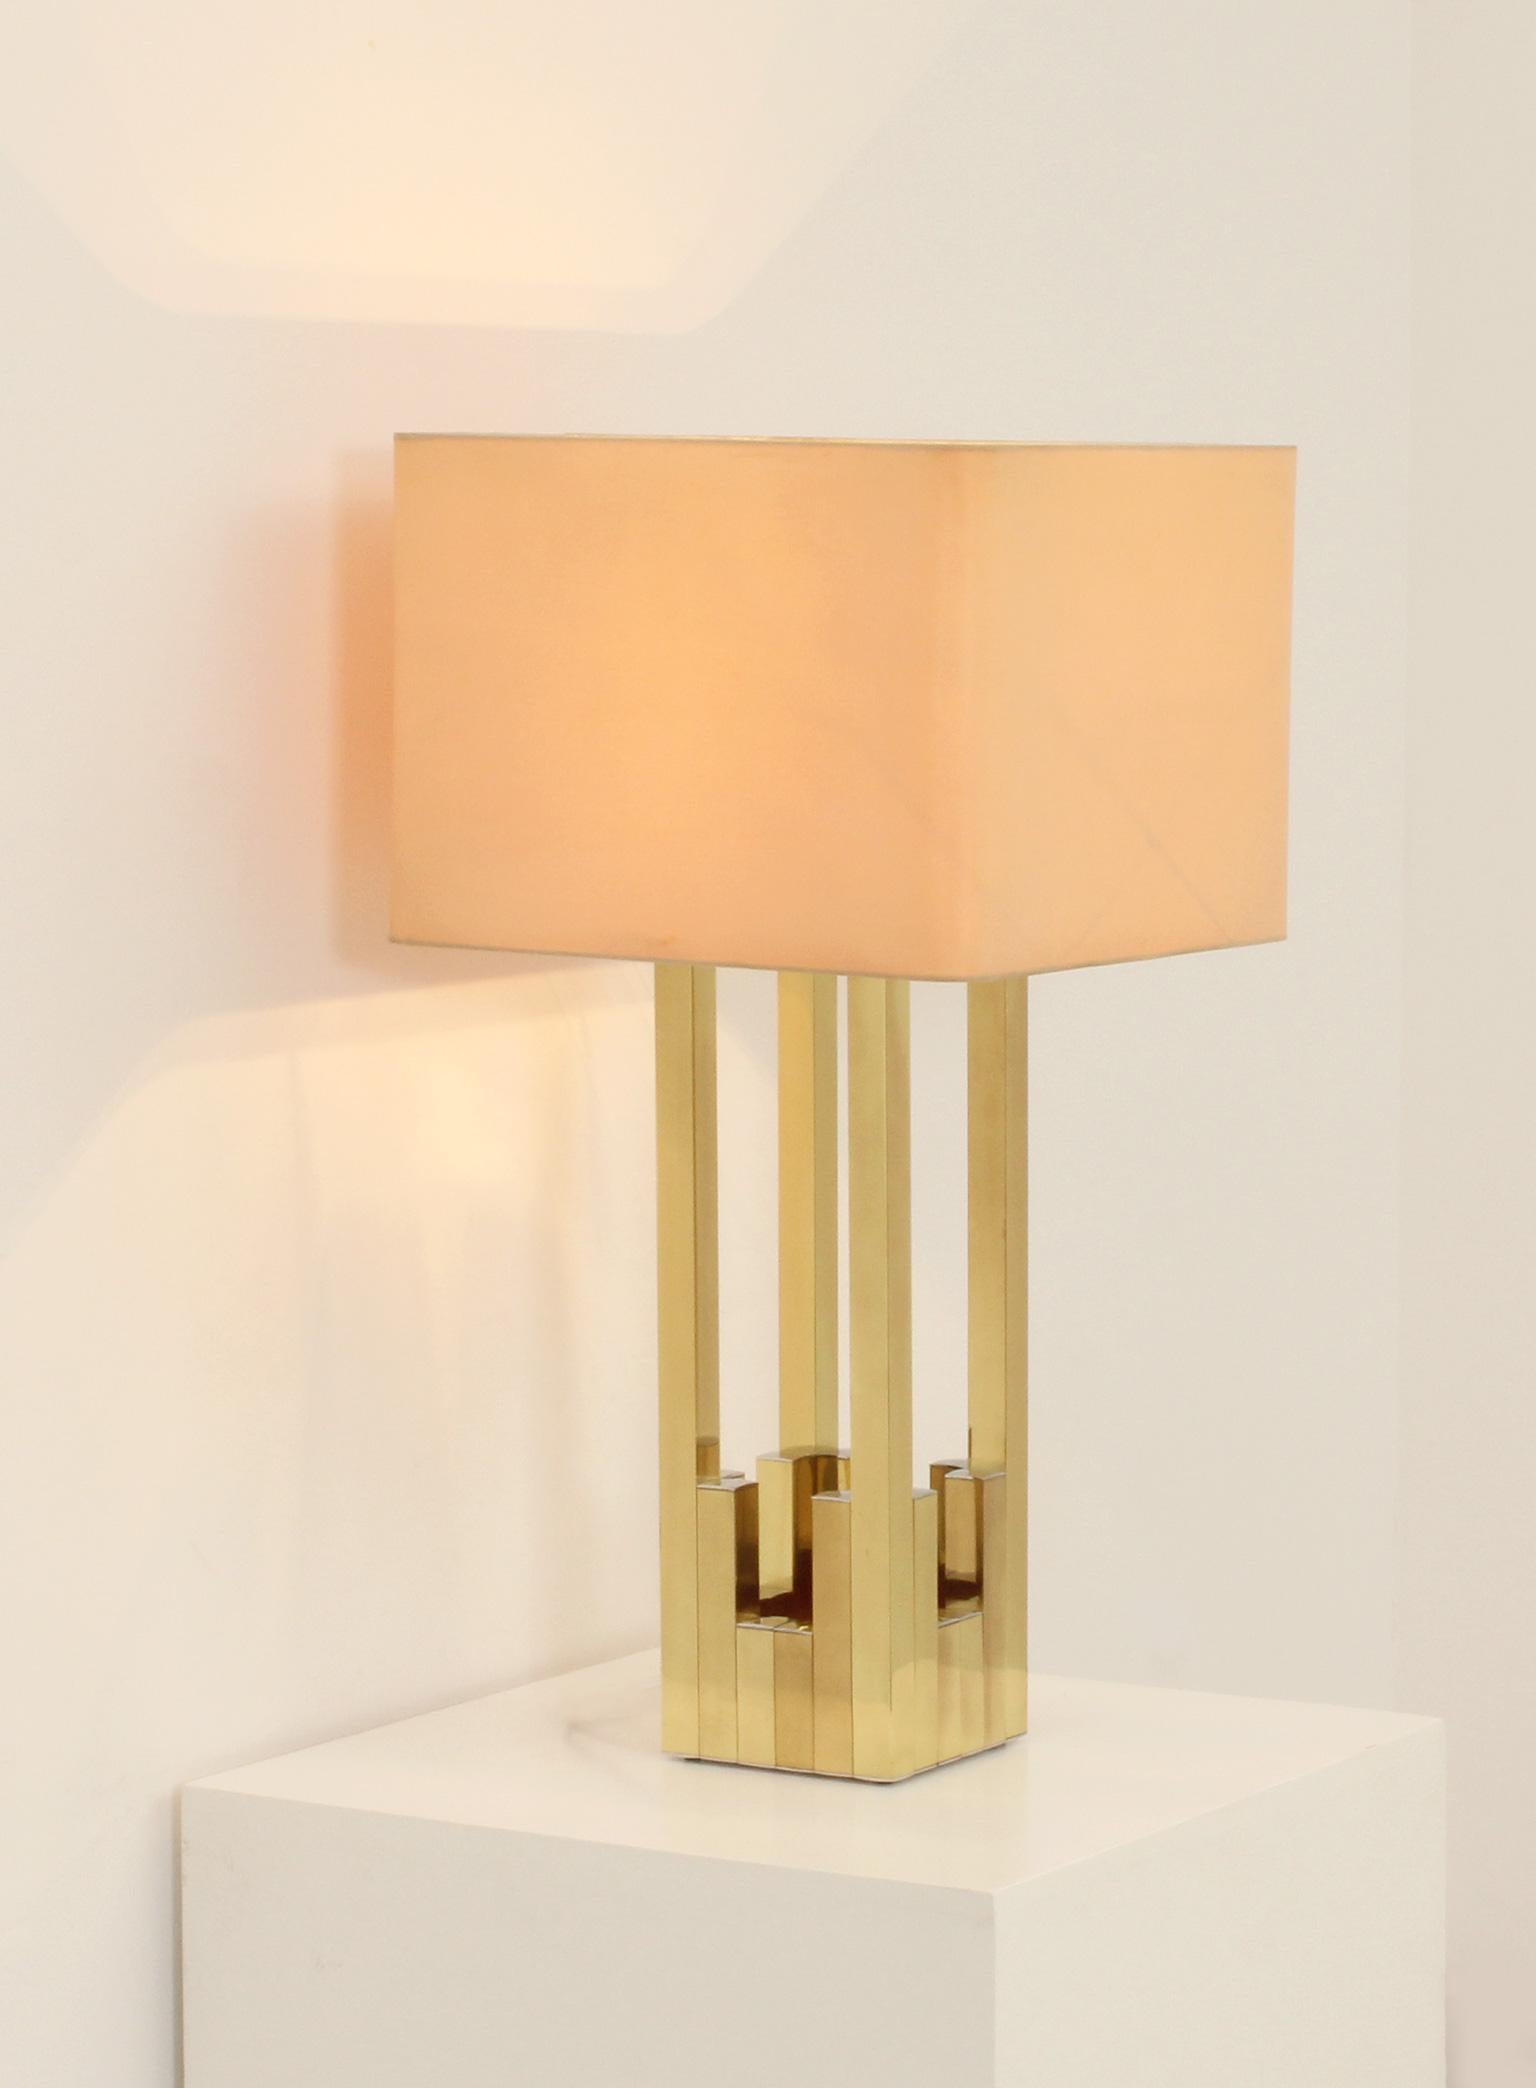 Large table lamp designed in 1970s by BD Lumica, Spain. Brass and chromed metal structure with three bulbs and original shade.